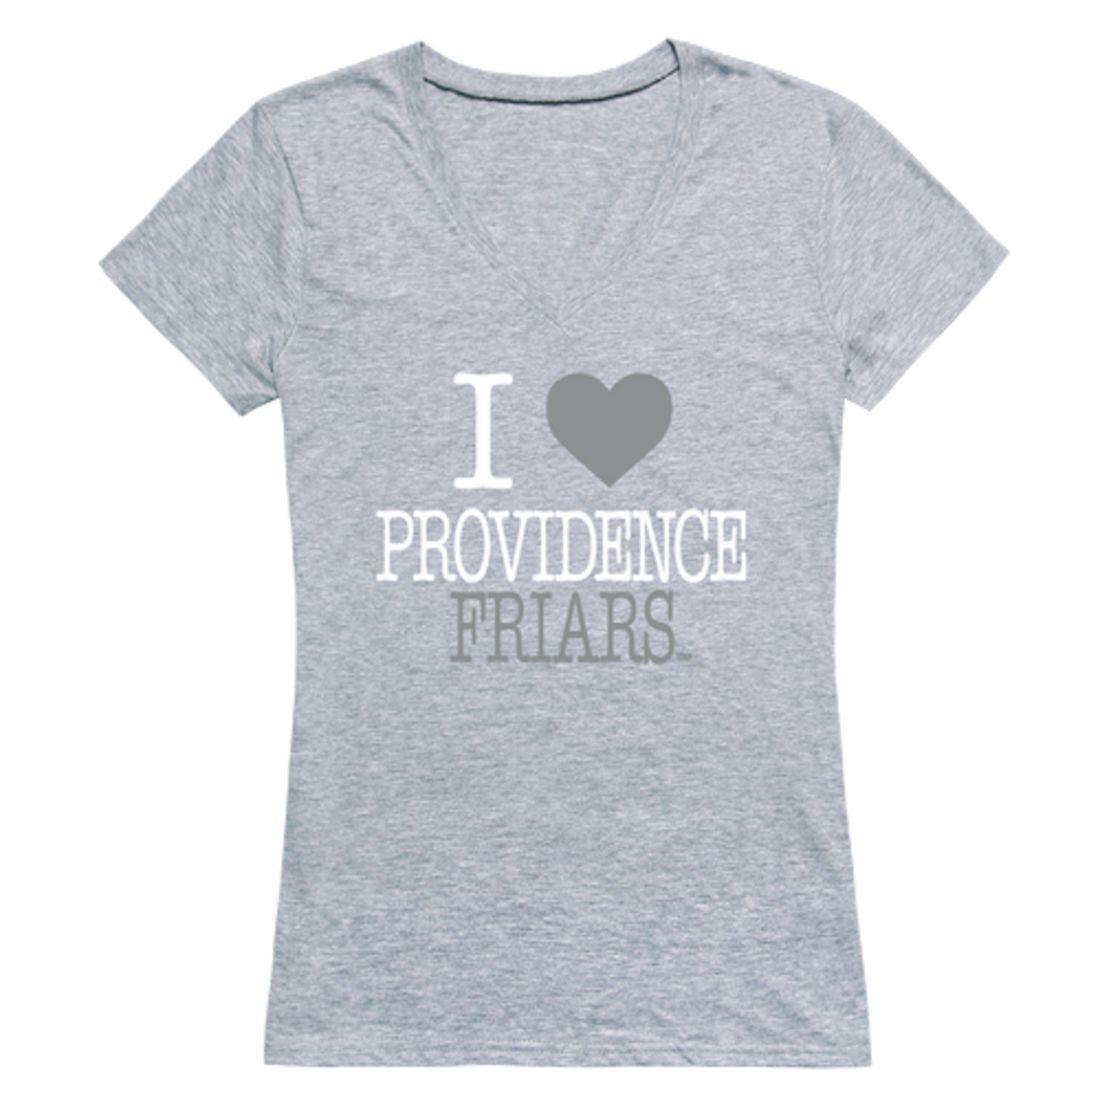 I Love Providence College Friars Womens T-Shirt-Campus-Wardrobe